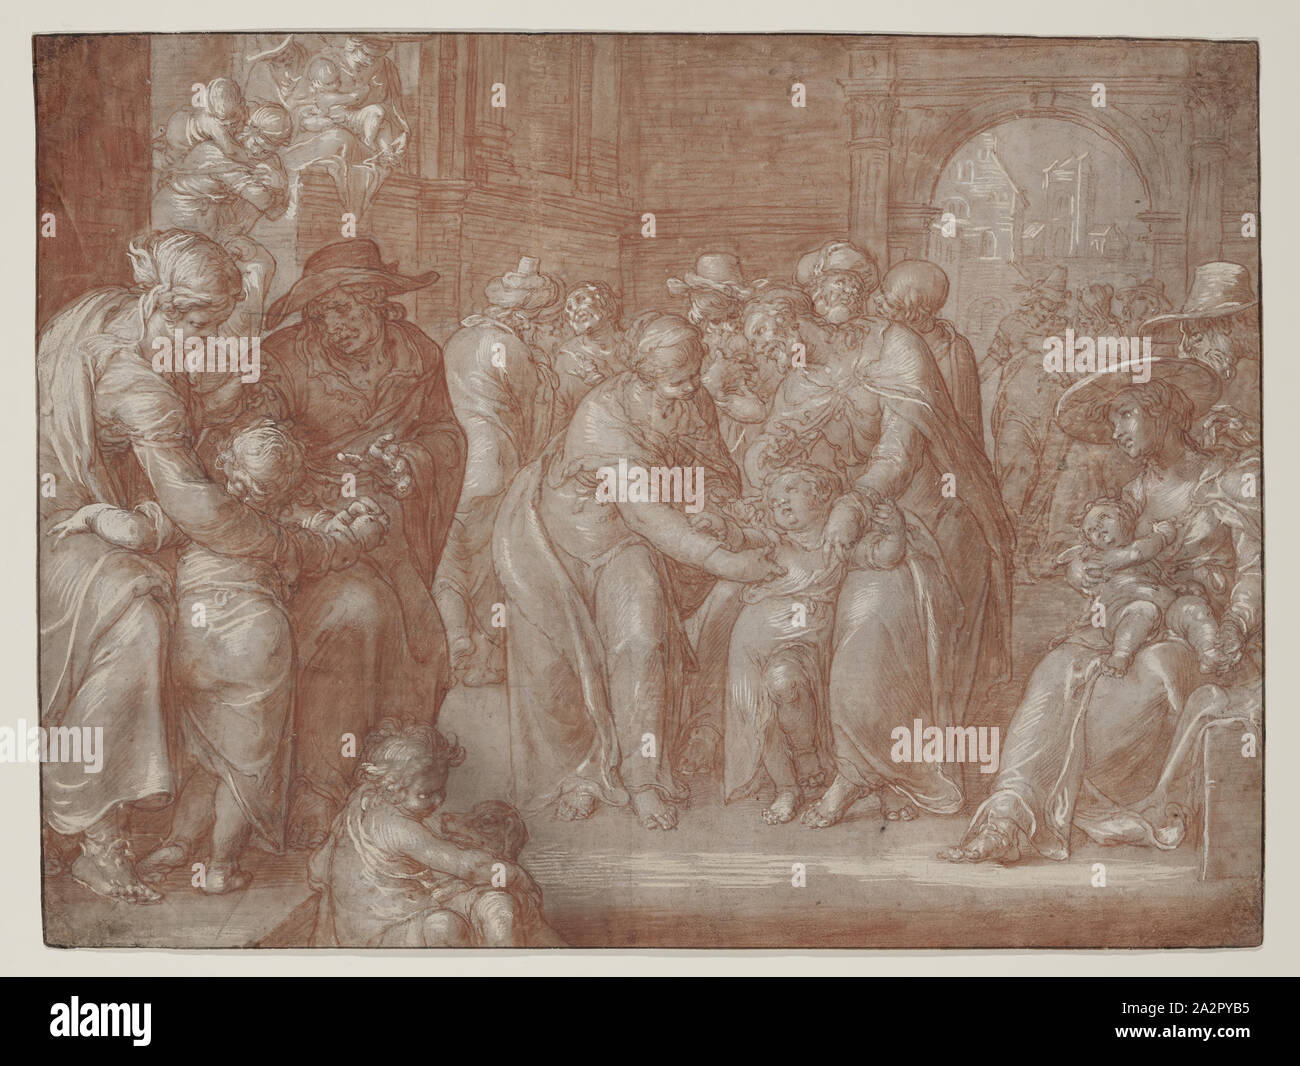 Joachim Wtewael, Netherlandish, 1566-1638, Suffer the Little Children to Come Unto Me, ca. 1621, red chalk over a preliminary drawing in black chalk, heightened with white, on discolored buff laid paper with a gray prepared ground, Sheet: 10 7/8 × 14 1/2 inches (27.6 × 36.8 cm Stock Photo